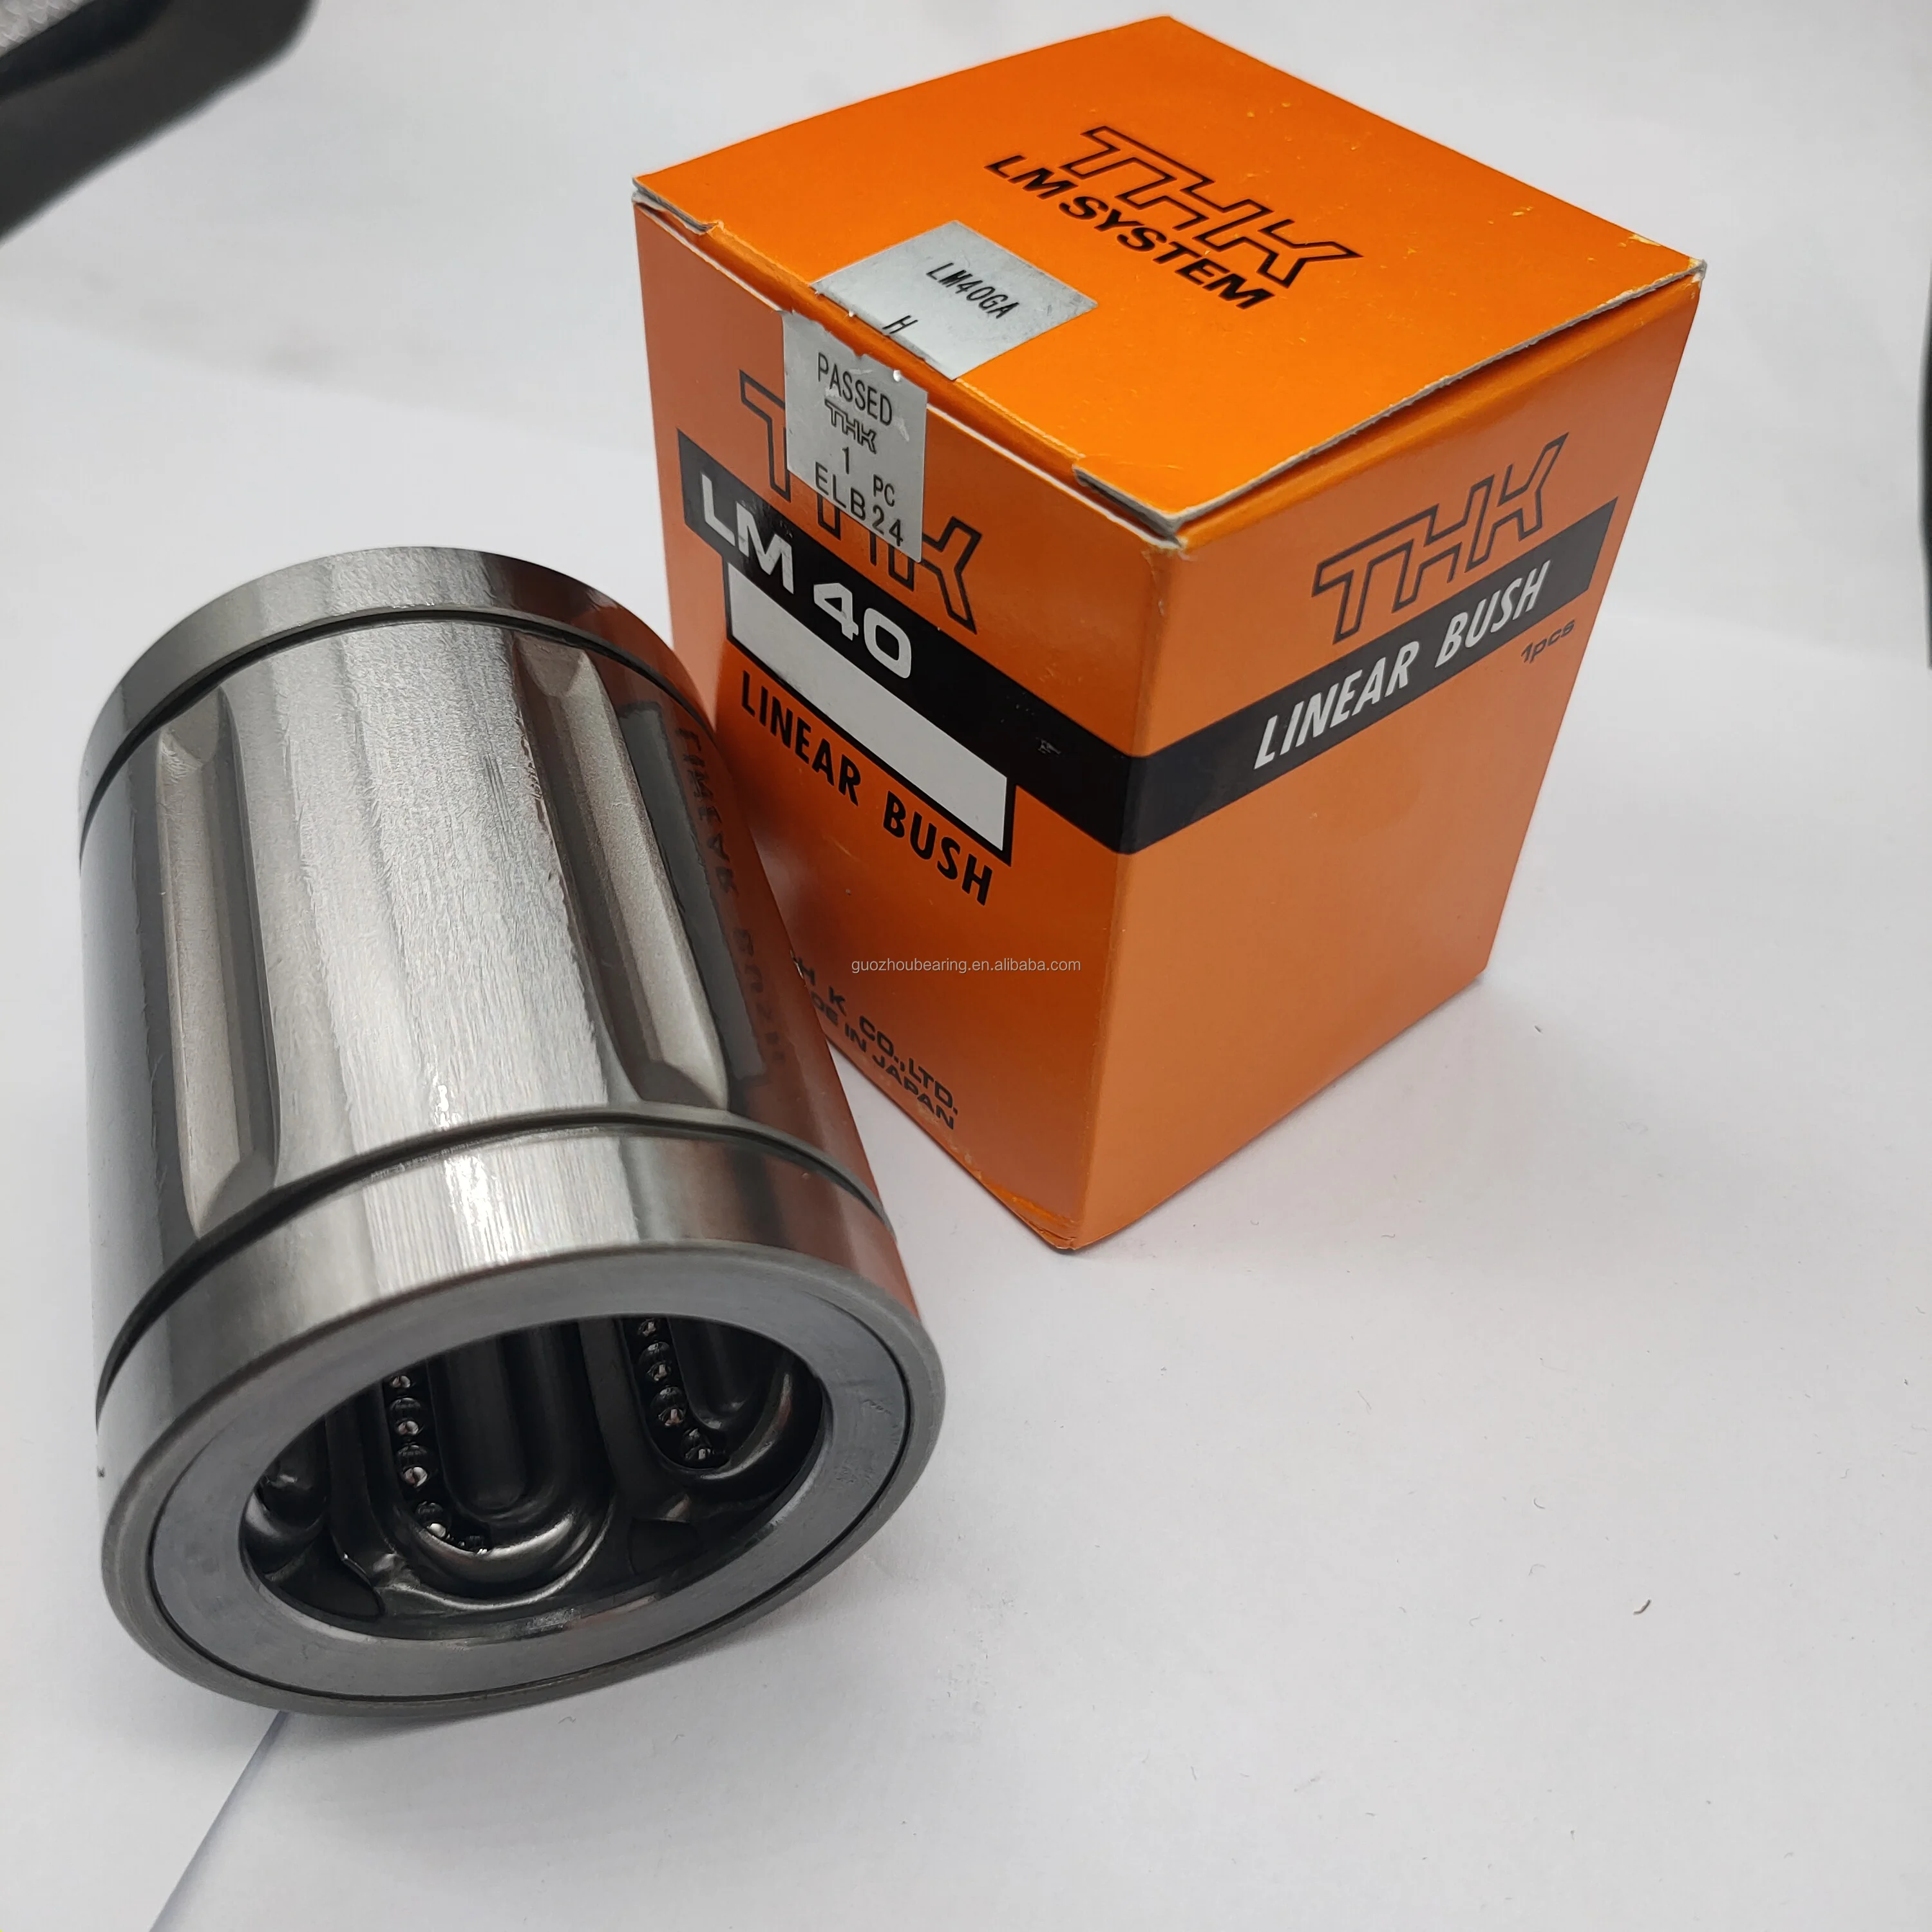 THK LM20UU Linear Bushing Bearing 20x32x42mm for sale online 